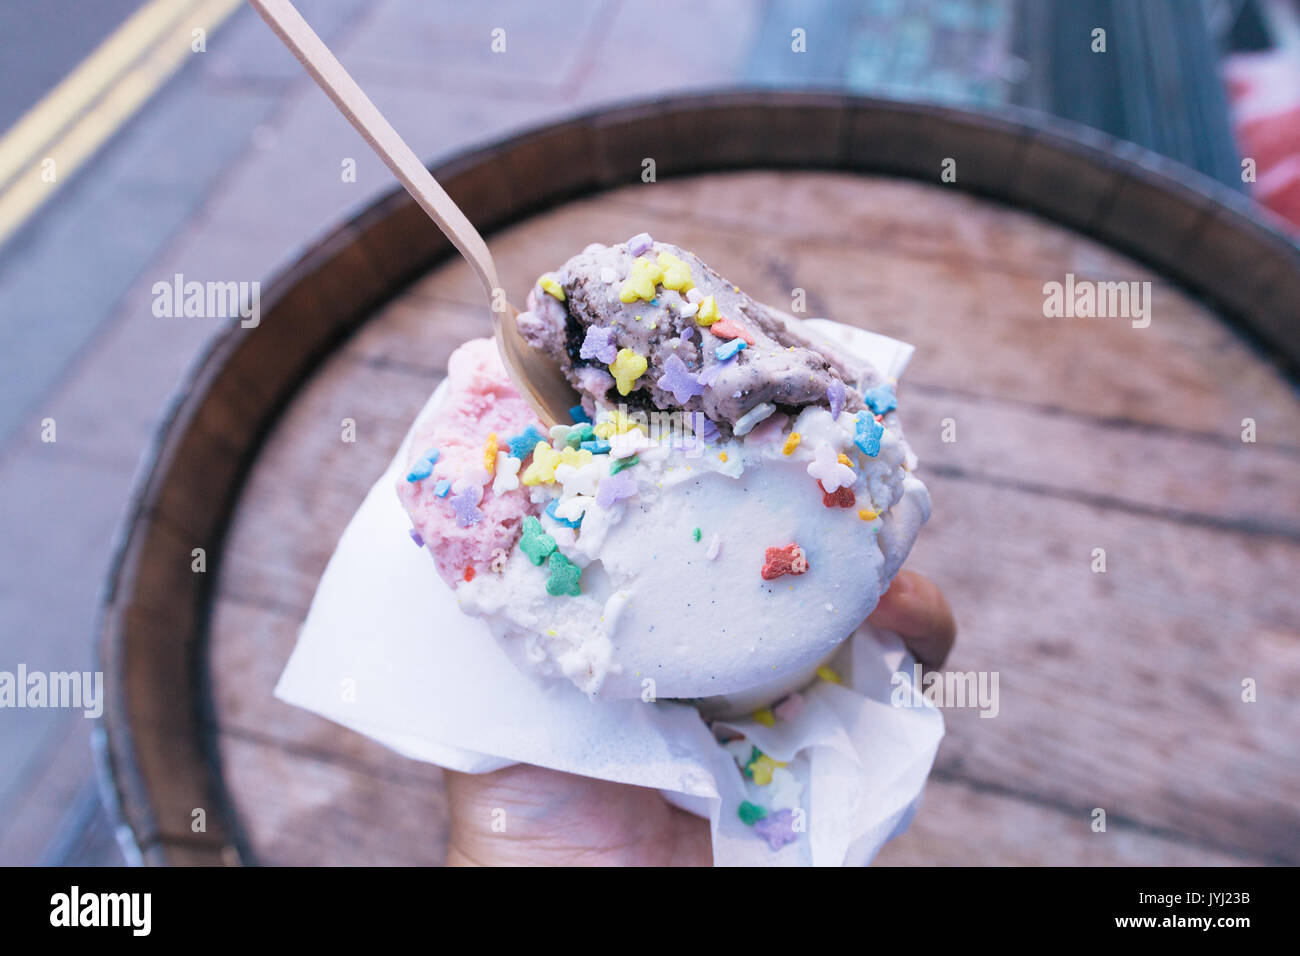 Vegan Ice Cream cone with sprinkles and wooden fork in front of wooden barrel table Stock Photo